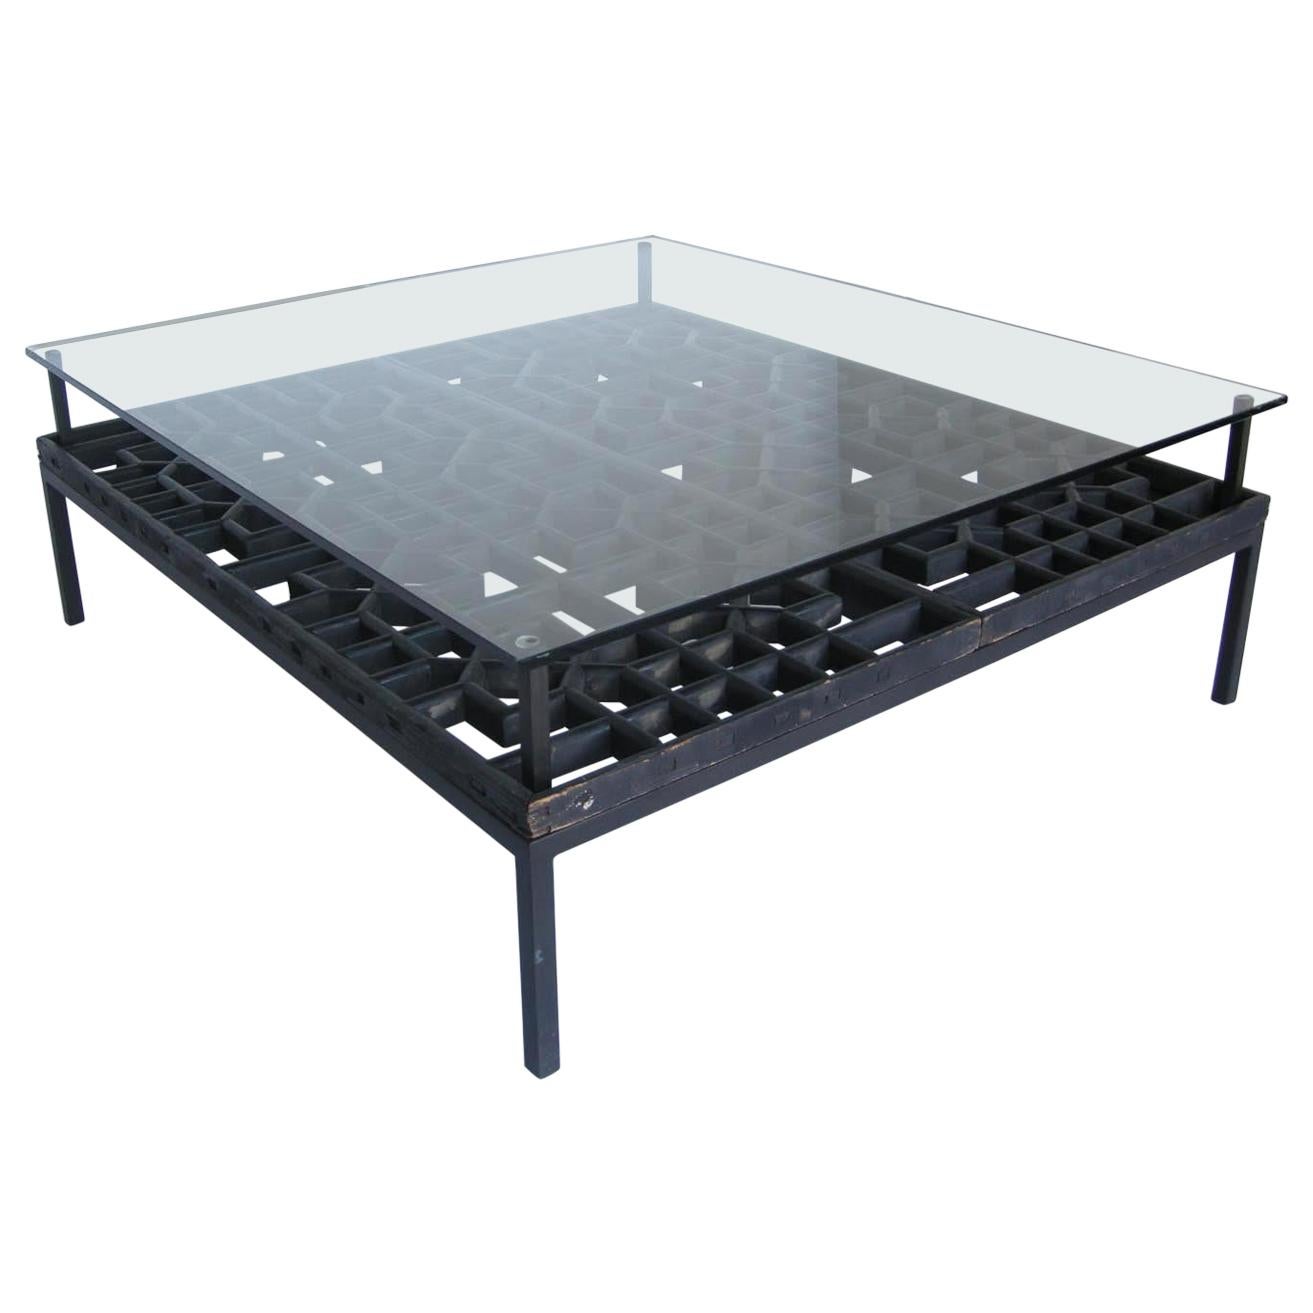 Japanese Fret Work Wooden Lattice Coffee Table with Glass Top